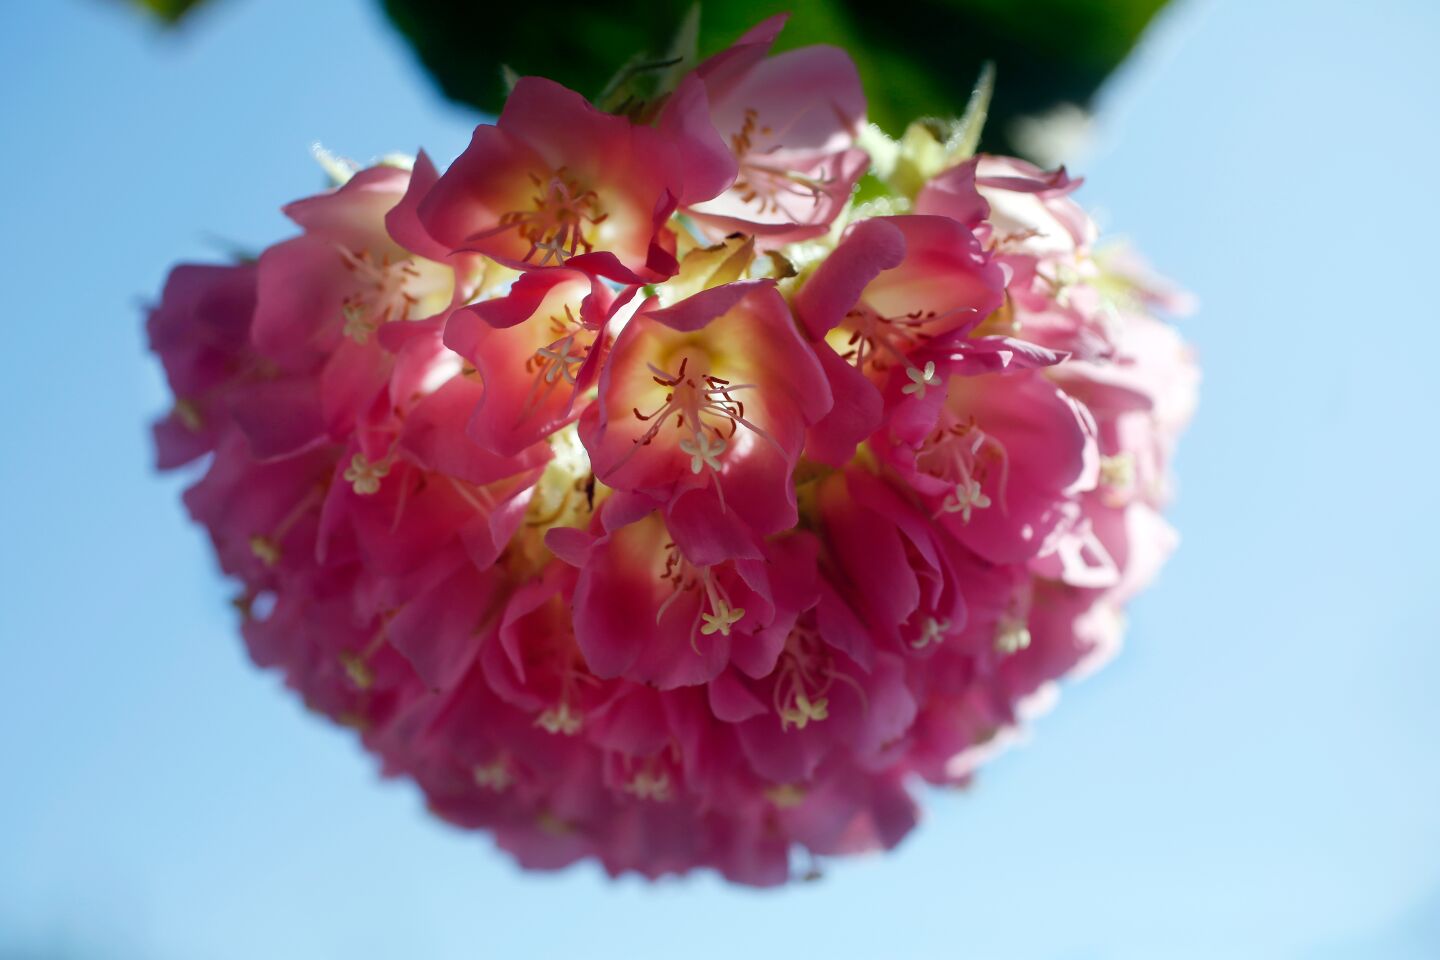 A flower from a Dombeya wallichii, also known as a Pink Ball Tree, which smells like cake batter.